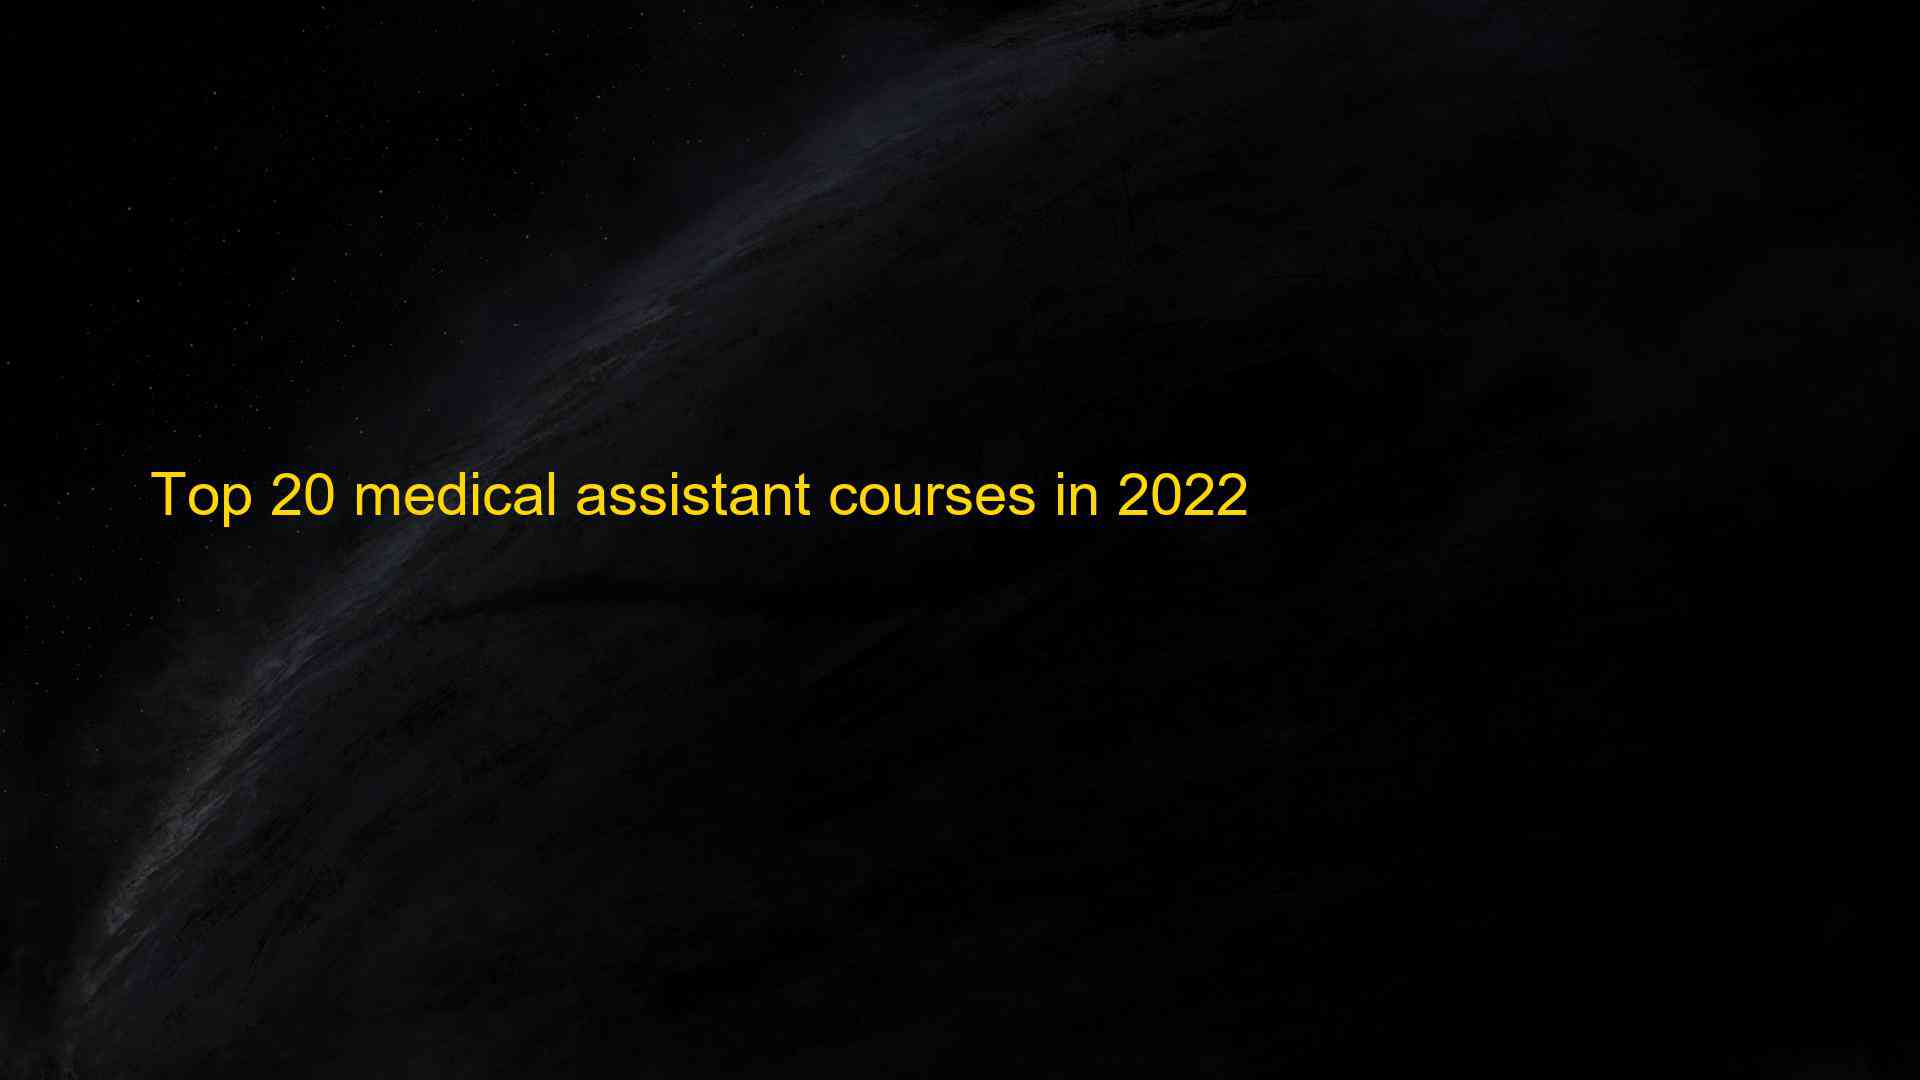 Top 20 medical assistant courses in 2022 1660817292